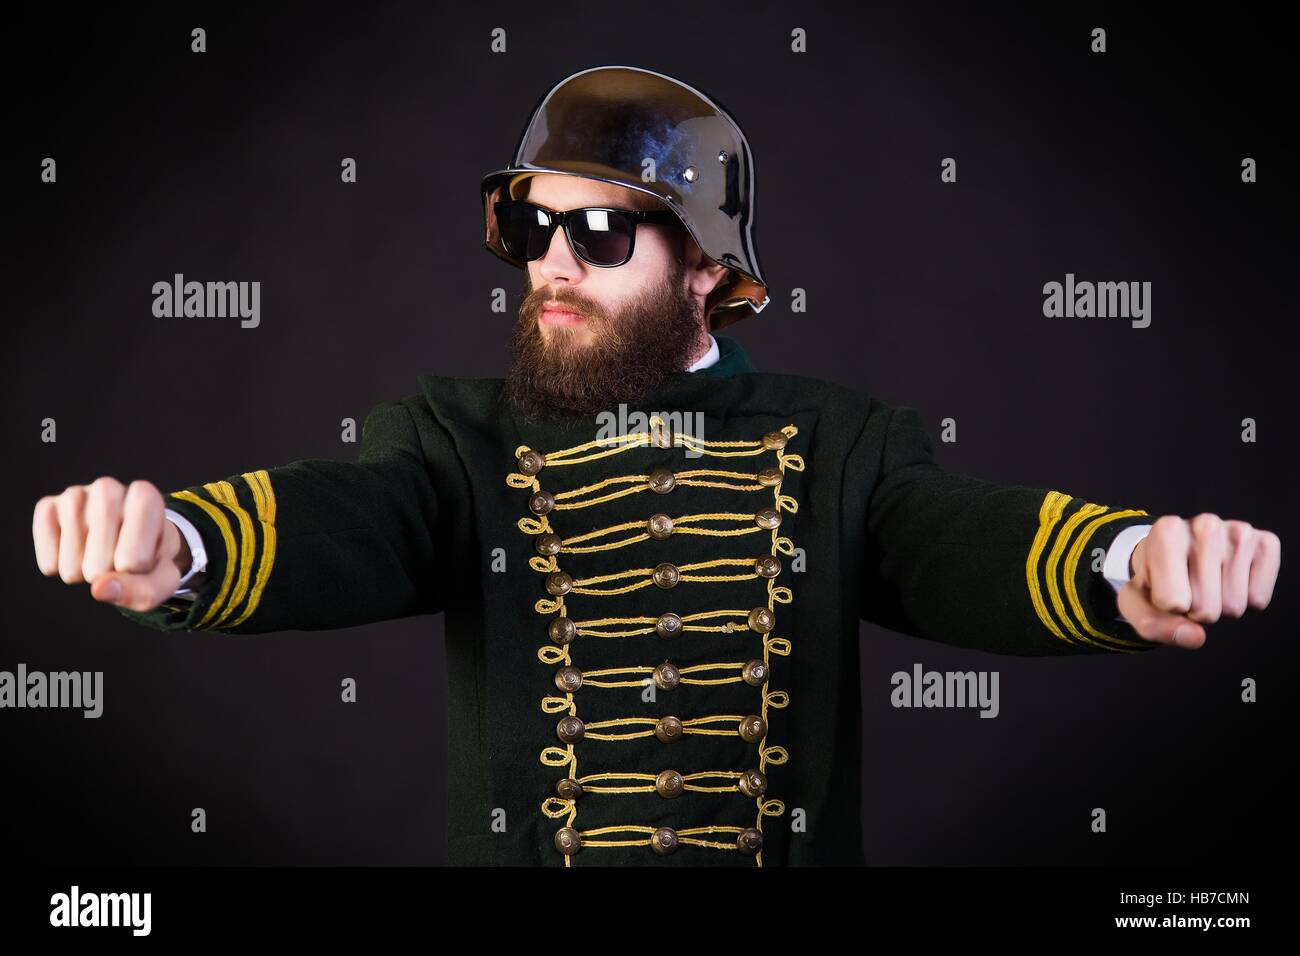 Man in interesting costume being funny. Stock Photo